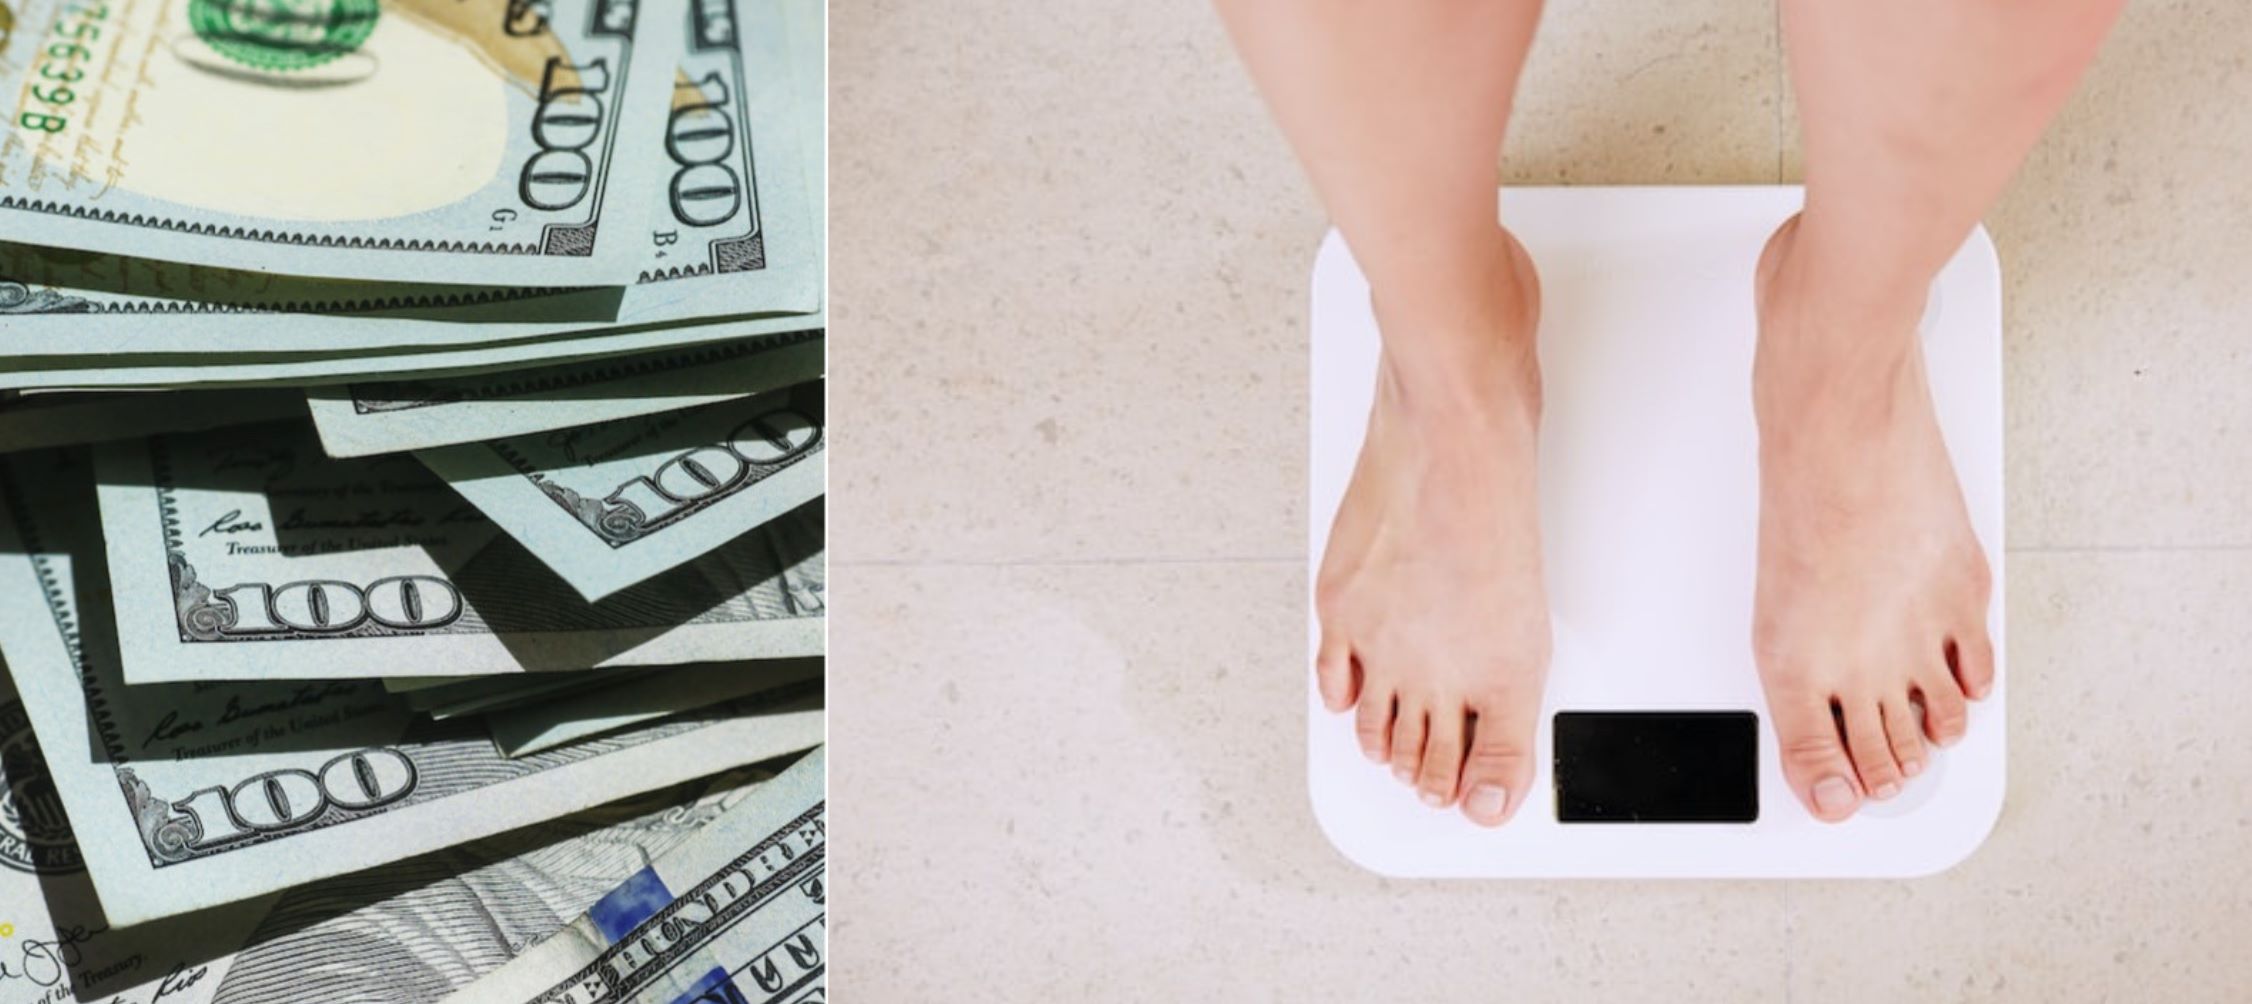 Lose Weight and Win $10,000 with Ilana’s FREE HealthyWage Weight Loss Challenge